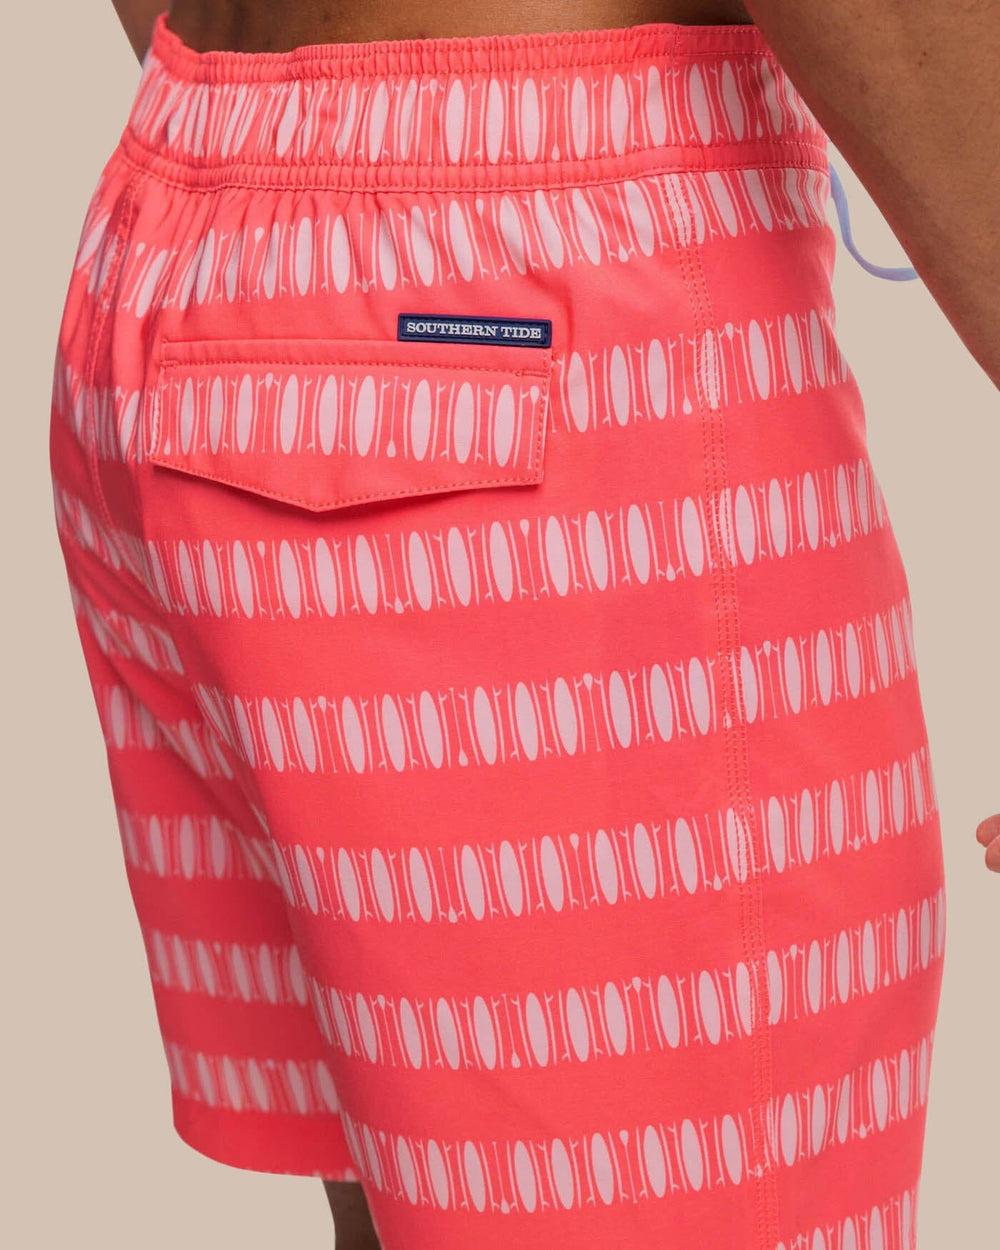 The detail view of the Southern Tide Paddlin Out Printed Swim Short by Southern Tide - Sunkist Coral